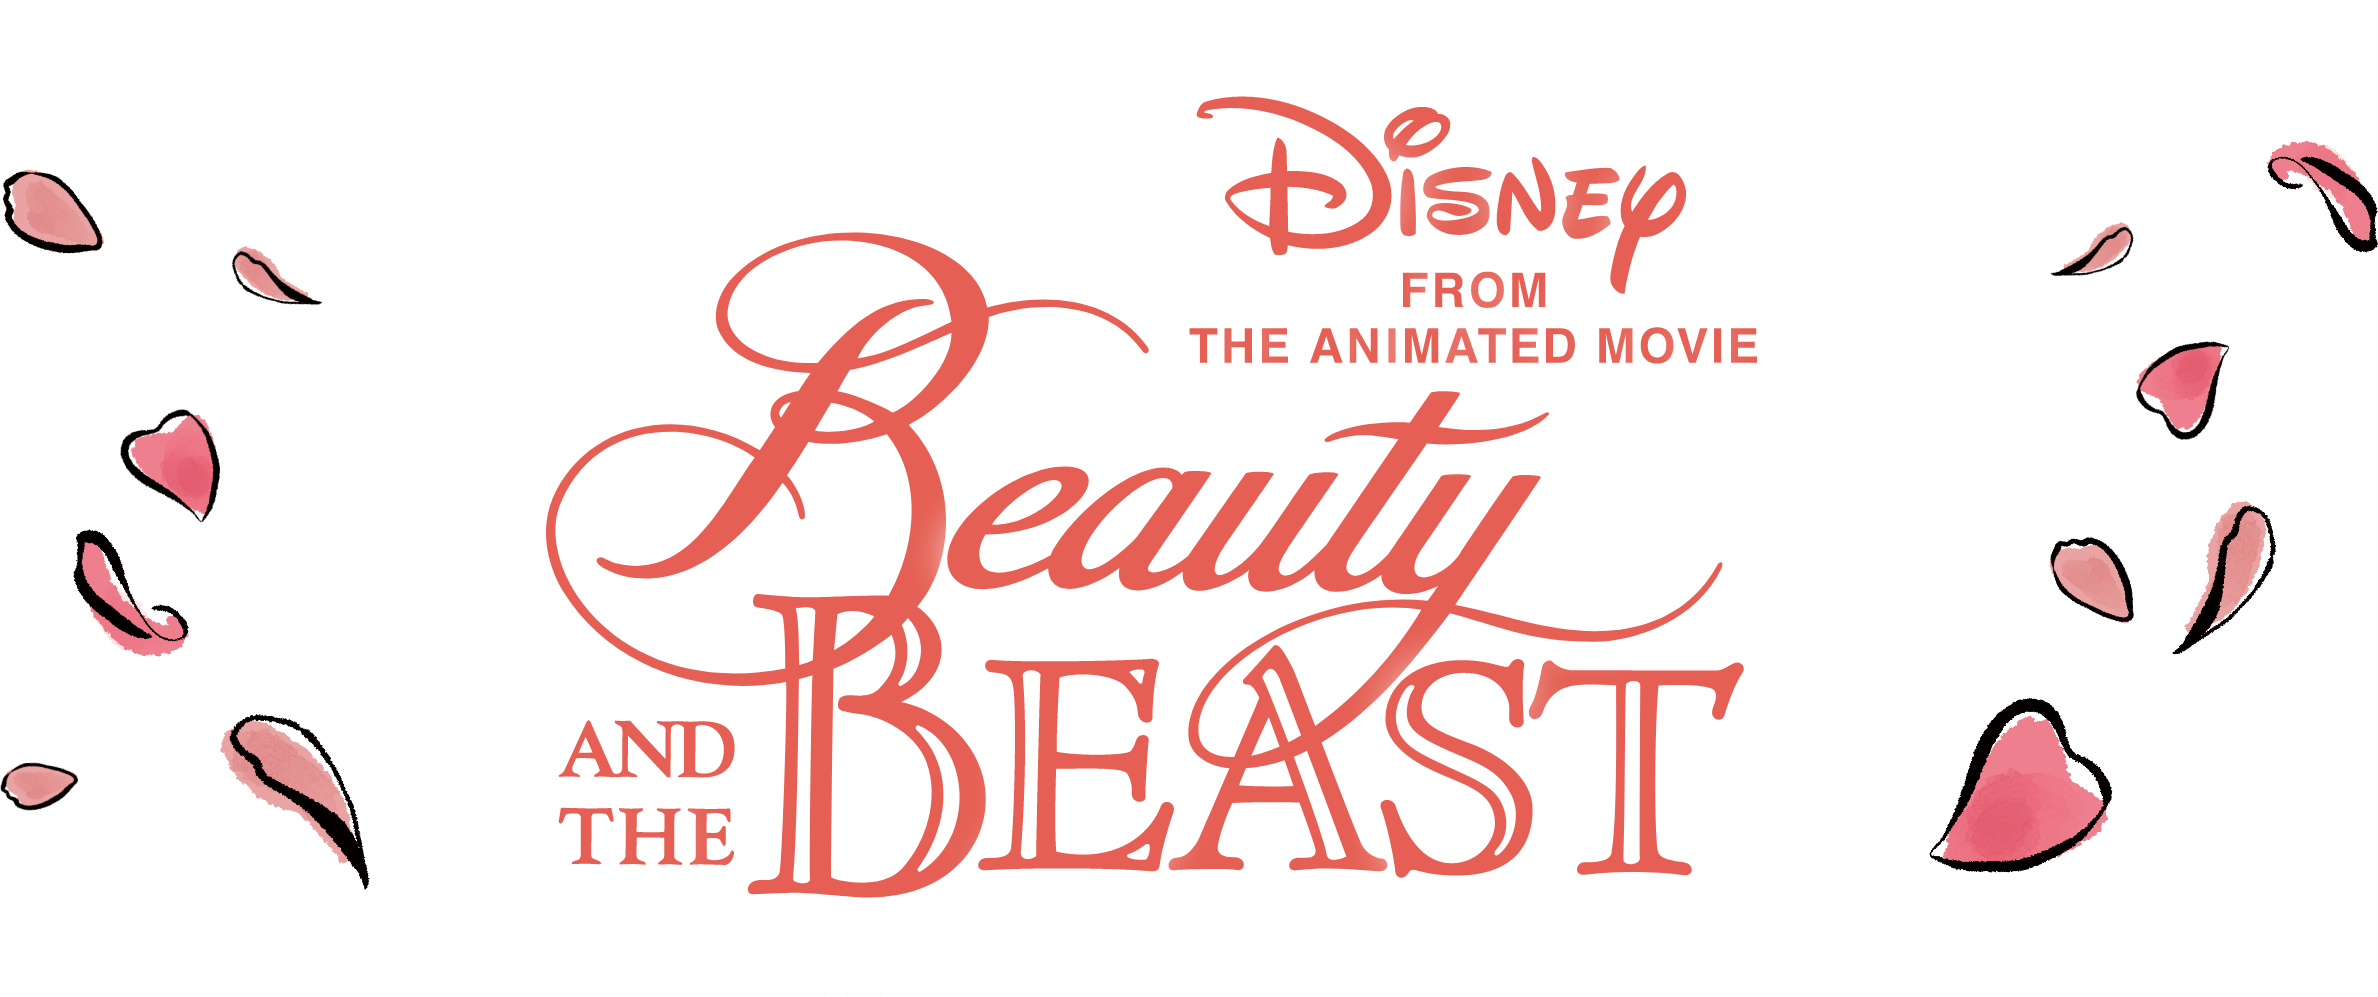 Disney from the animated movie Beauty and the BEAST